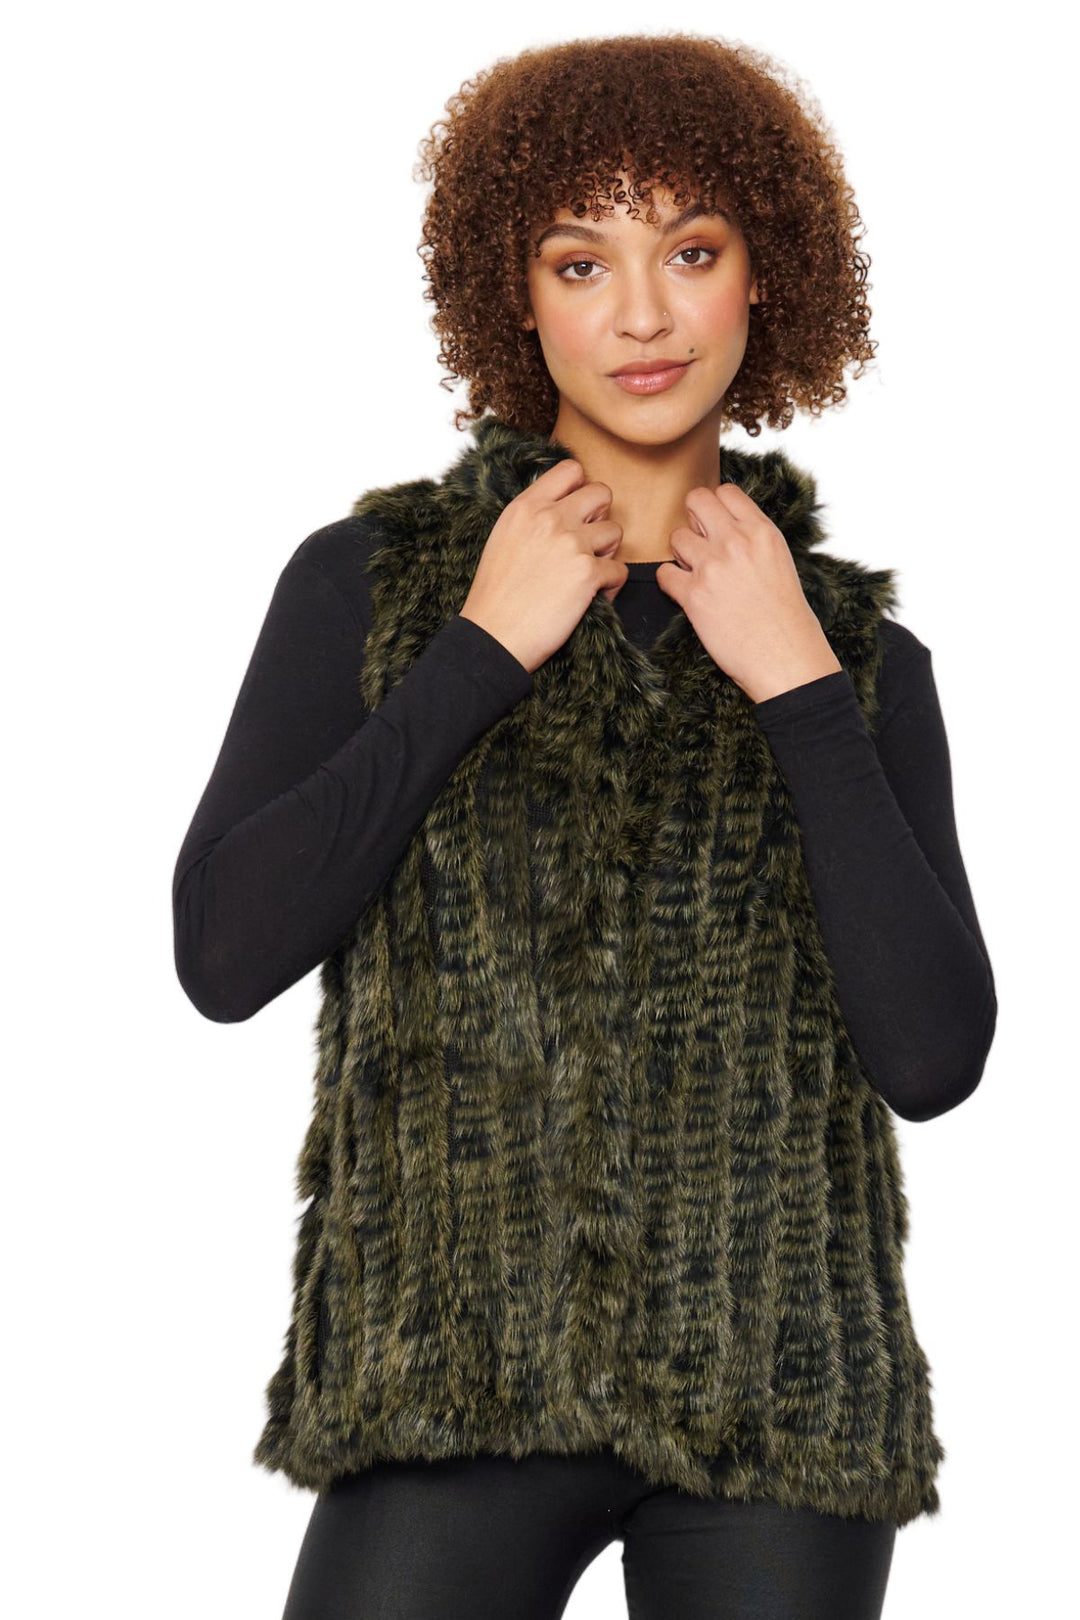 Absolute luxury the Jessica Vest by designer Caju is a bold and beautiful piece